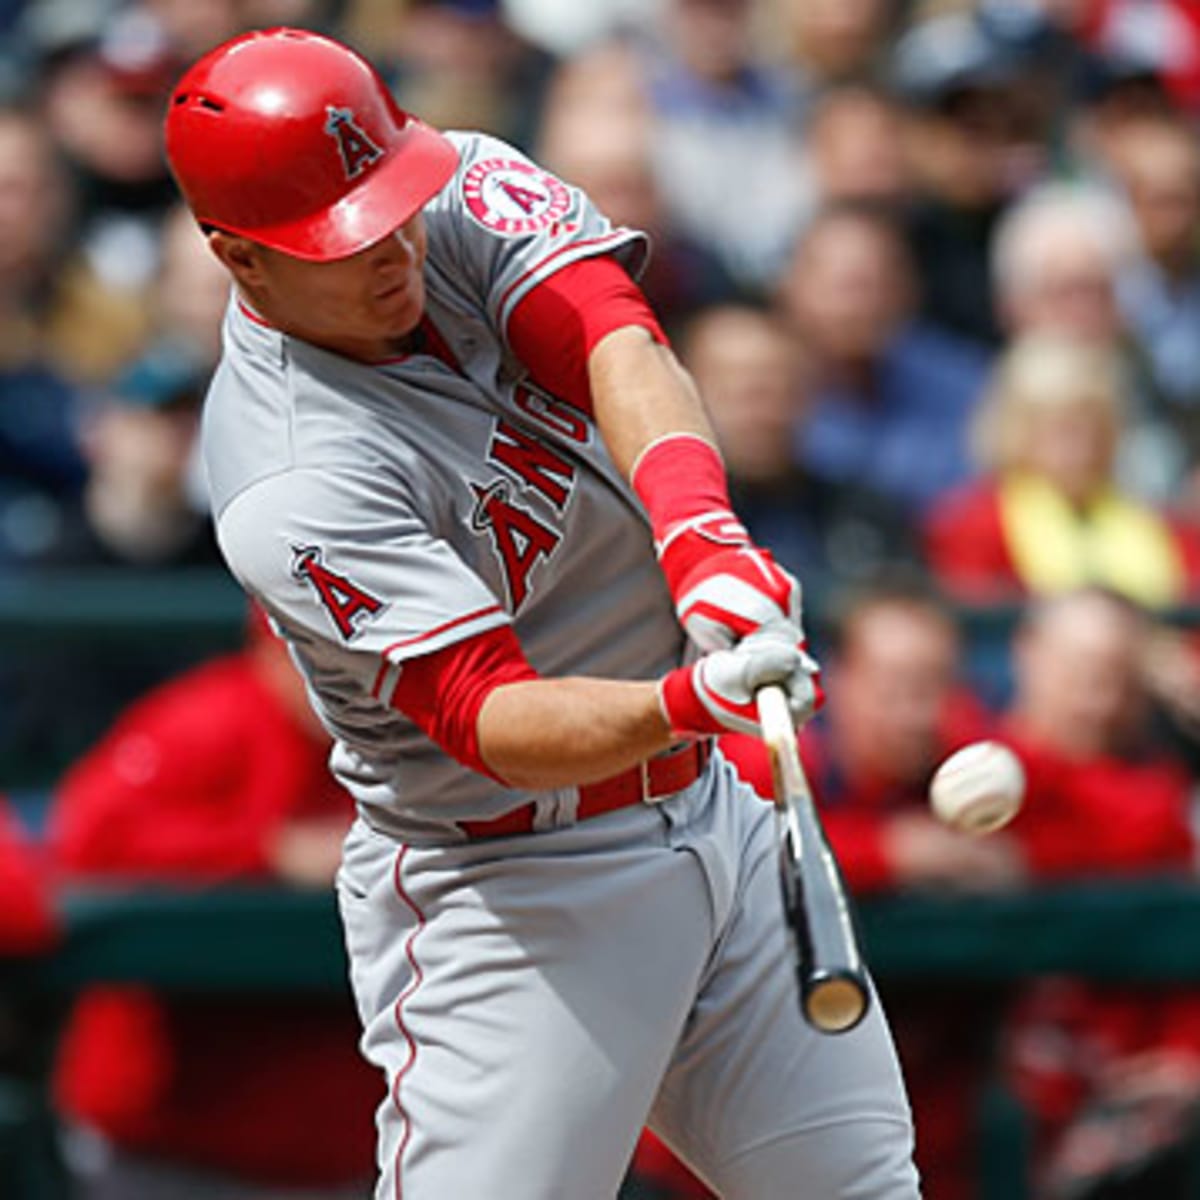 Mike Trout's Major League debut gave us a quick glimpse of the